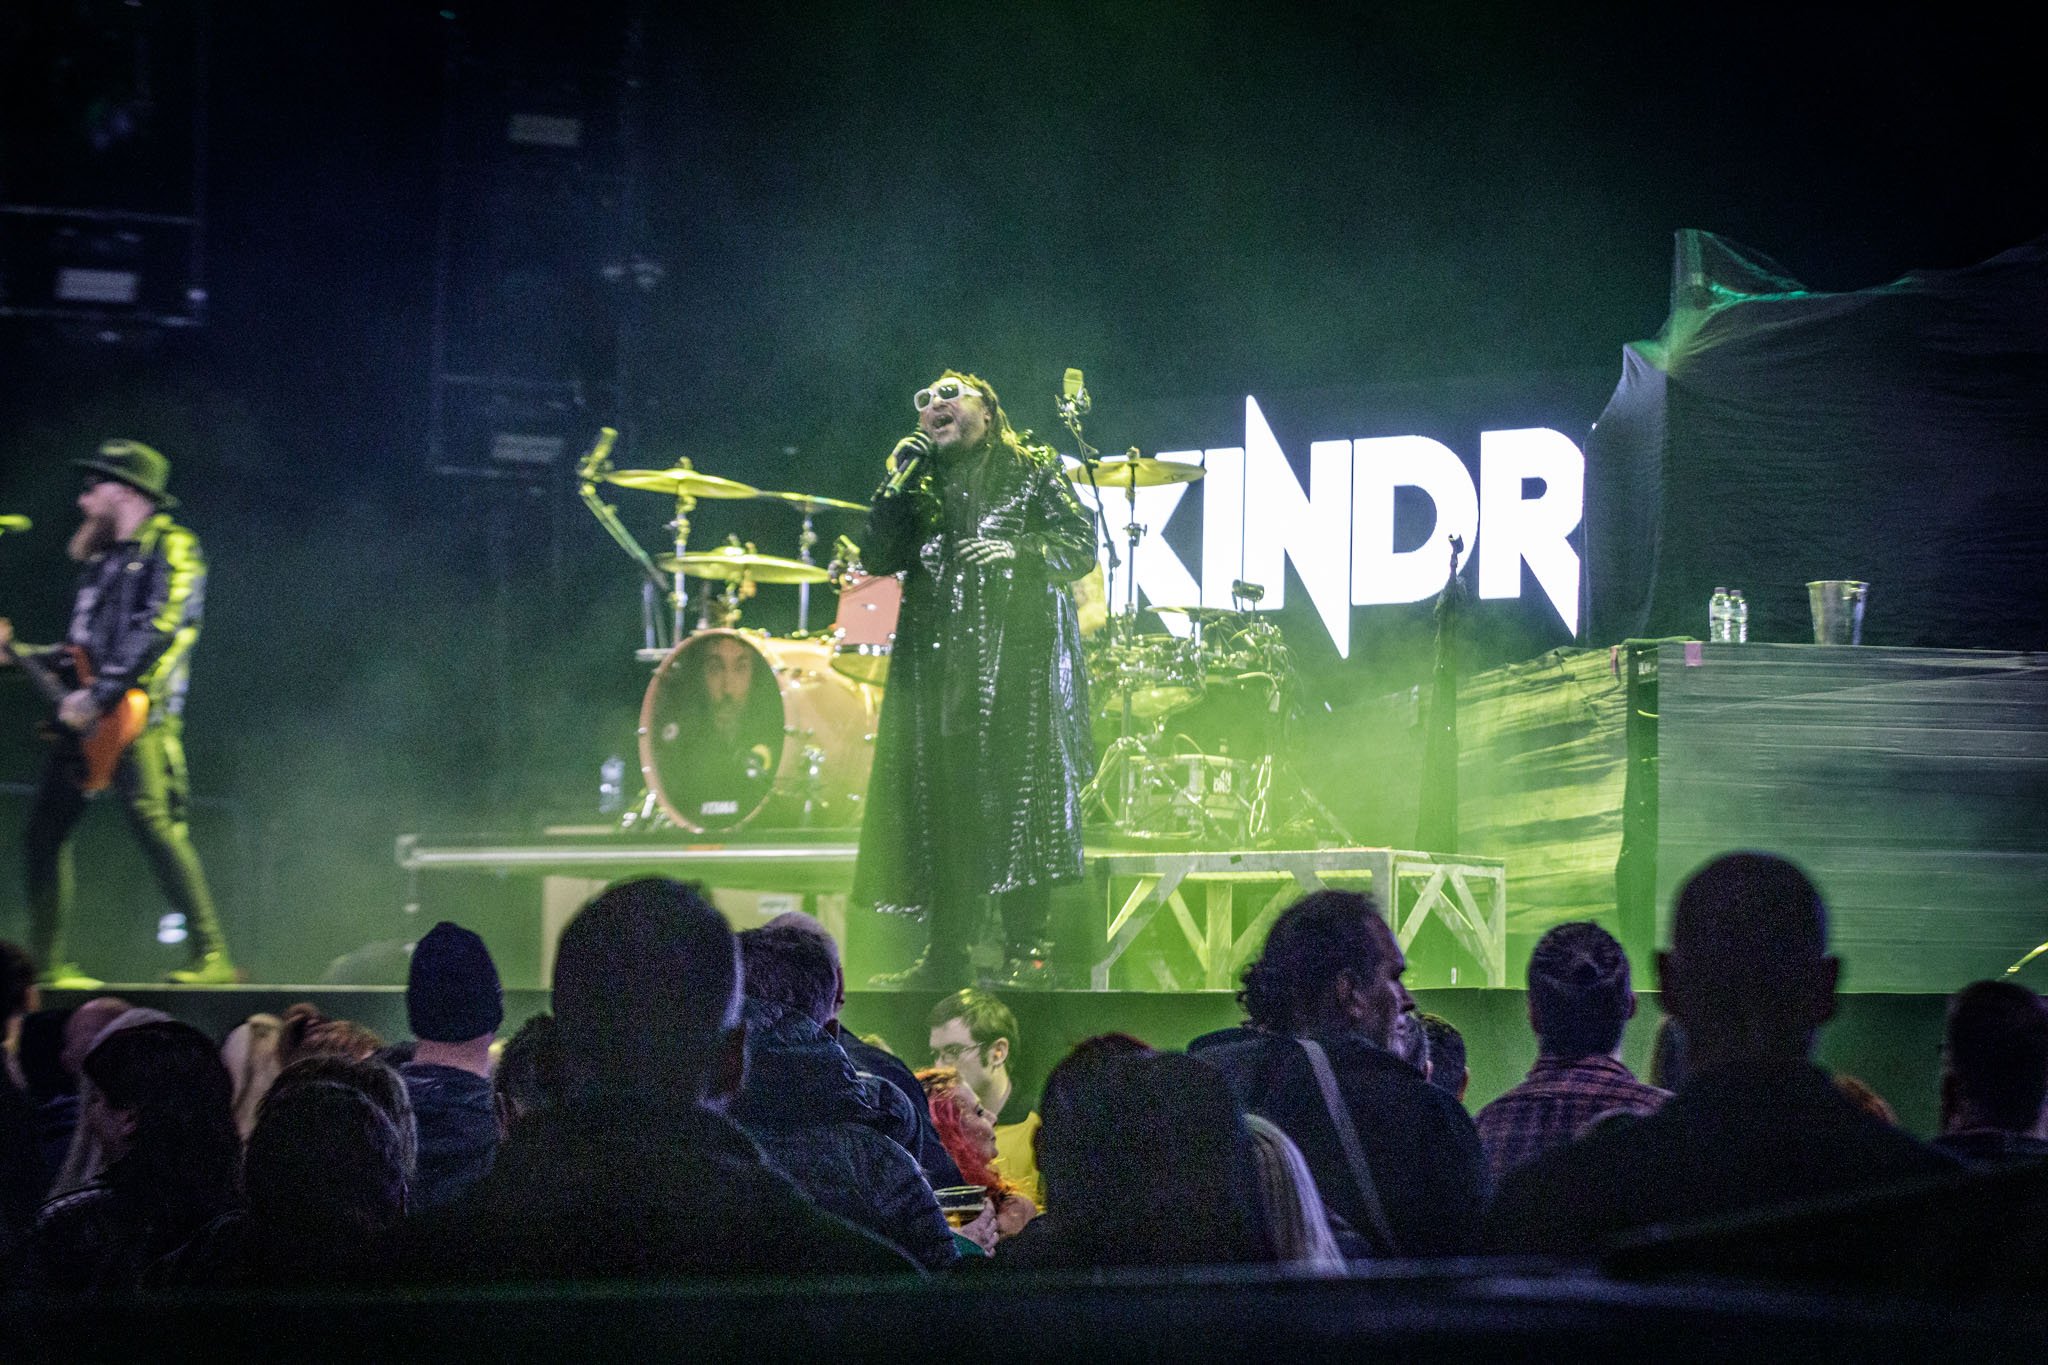 Skindred at the First Direct Arena in Leeds on December 16th 202